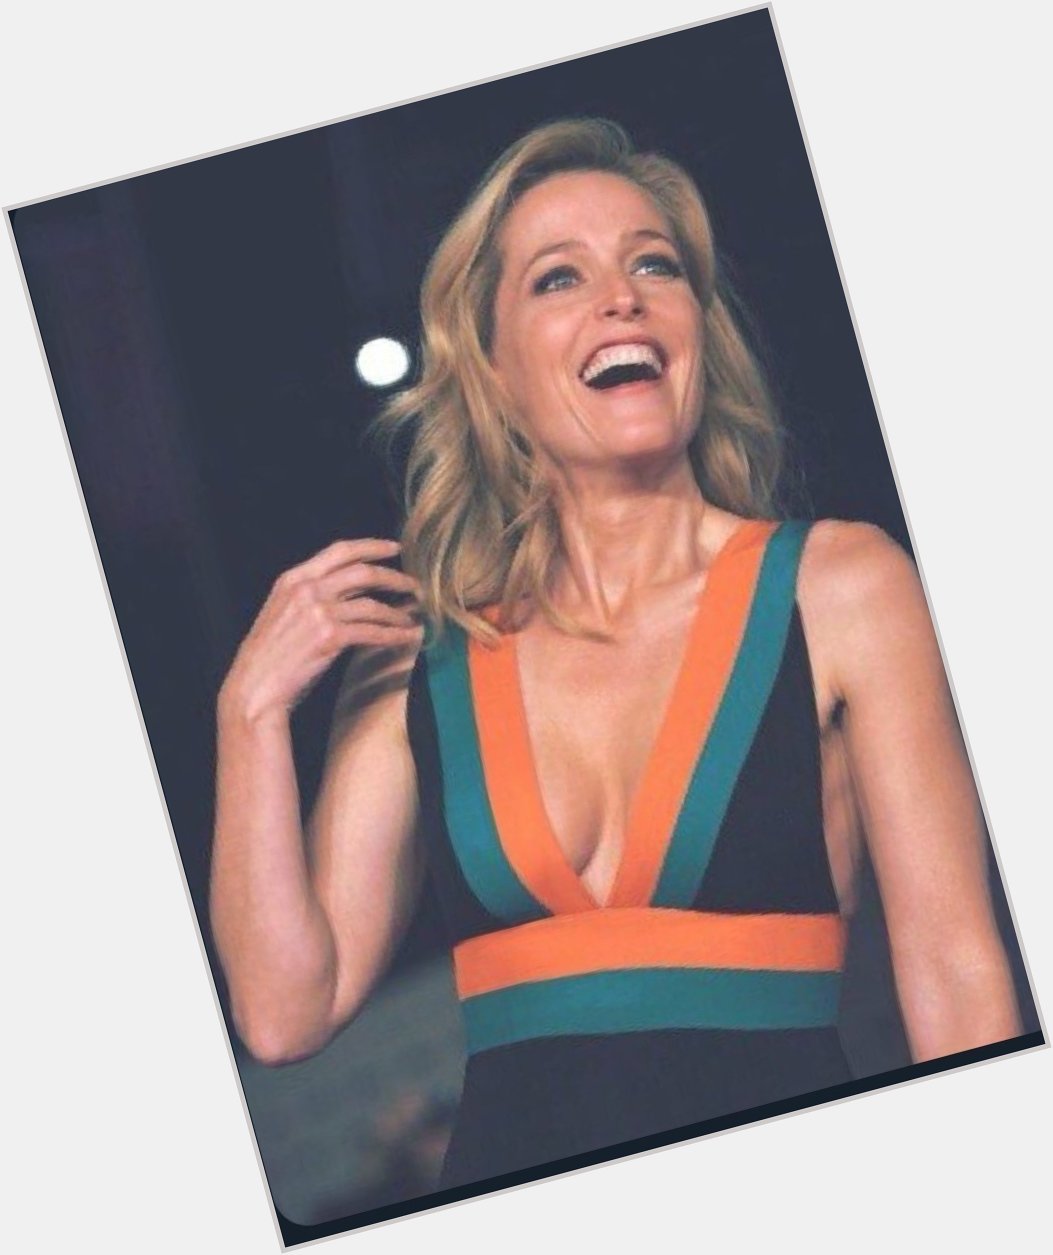 Can\t believe Gillian Anderson is 53, Happy Birthday Gillian Beautiful woman and brillant actress 